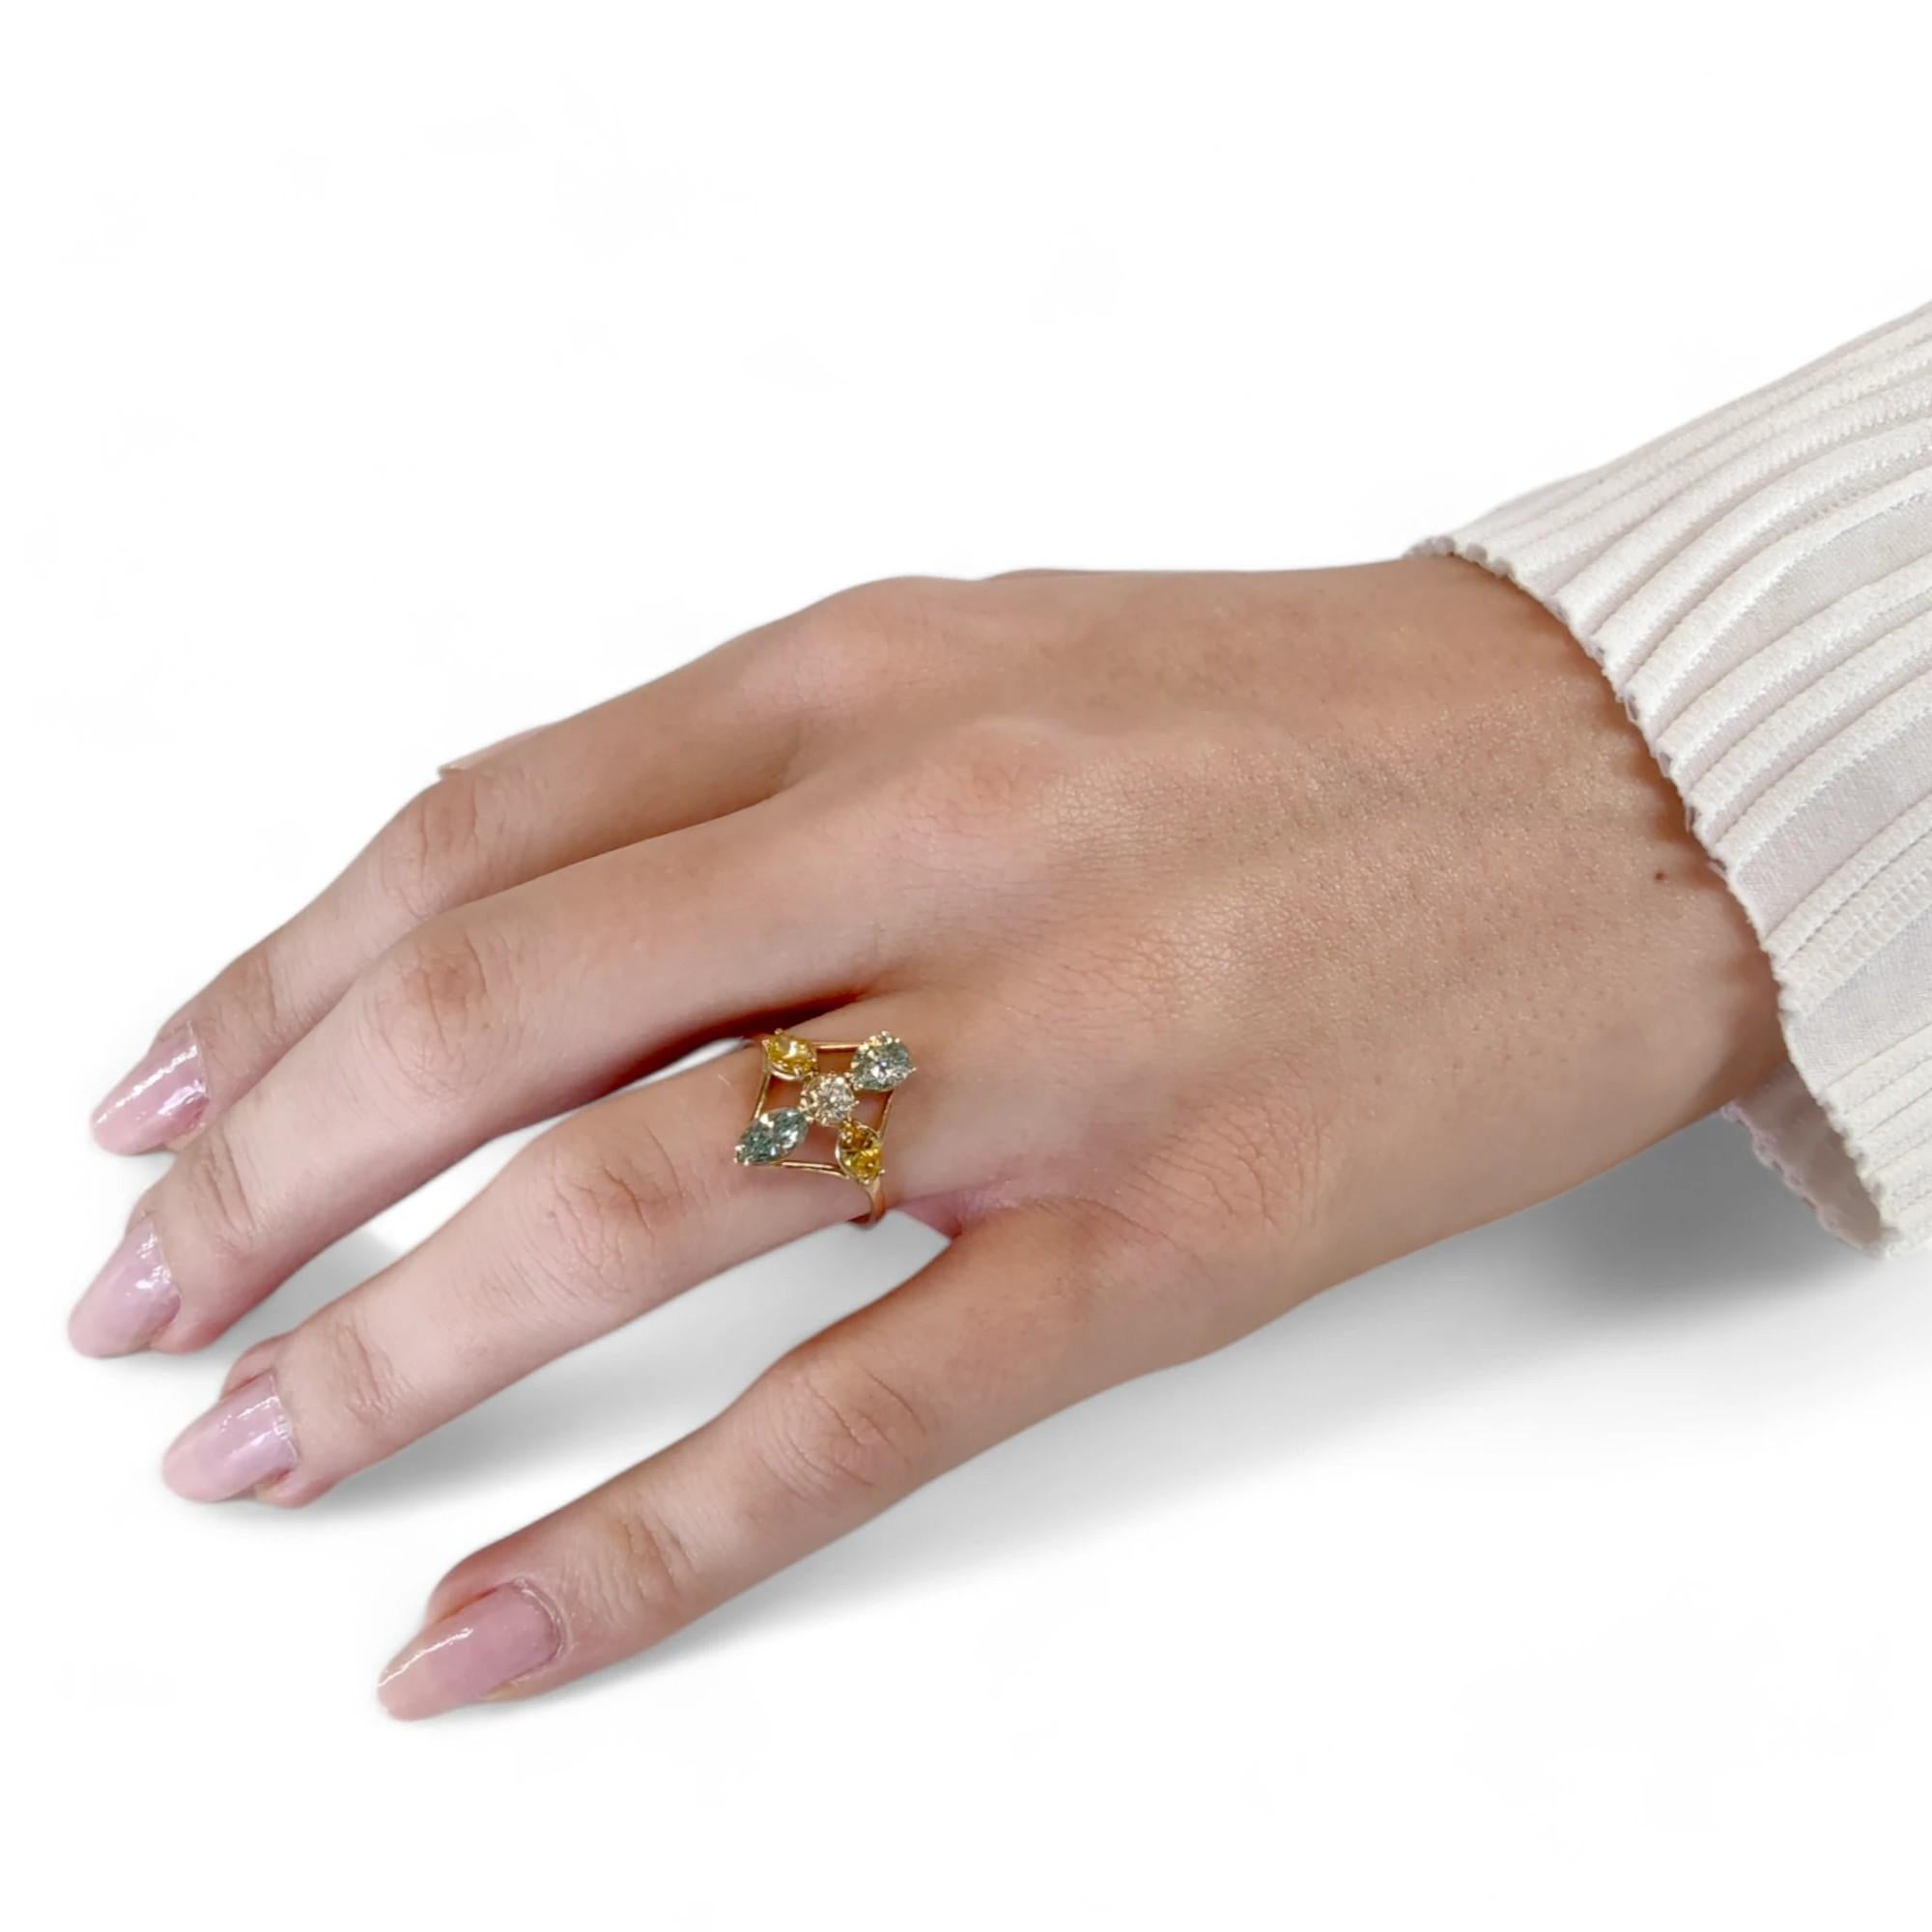 
Explore this exquisite, handcrafted 14K gold ring with a unique fancy color diamond. Ideal for American women, it's a perfect choice for engagement, weddings, or as a stunning cocktail ring. Elevate your style with this one-of-a-kind jewelry